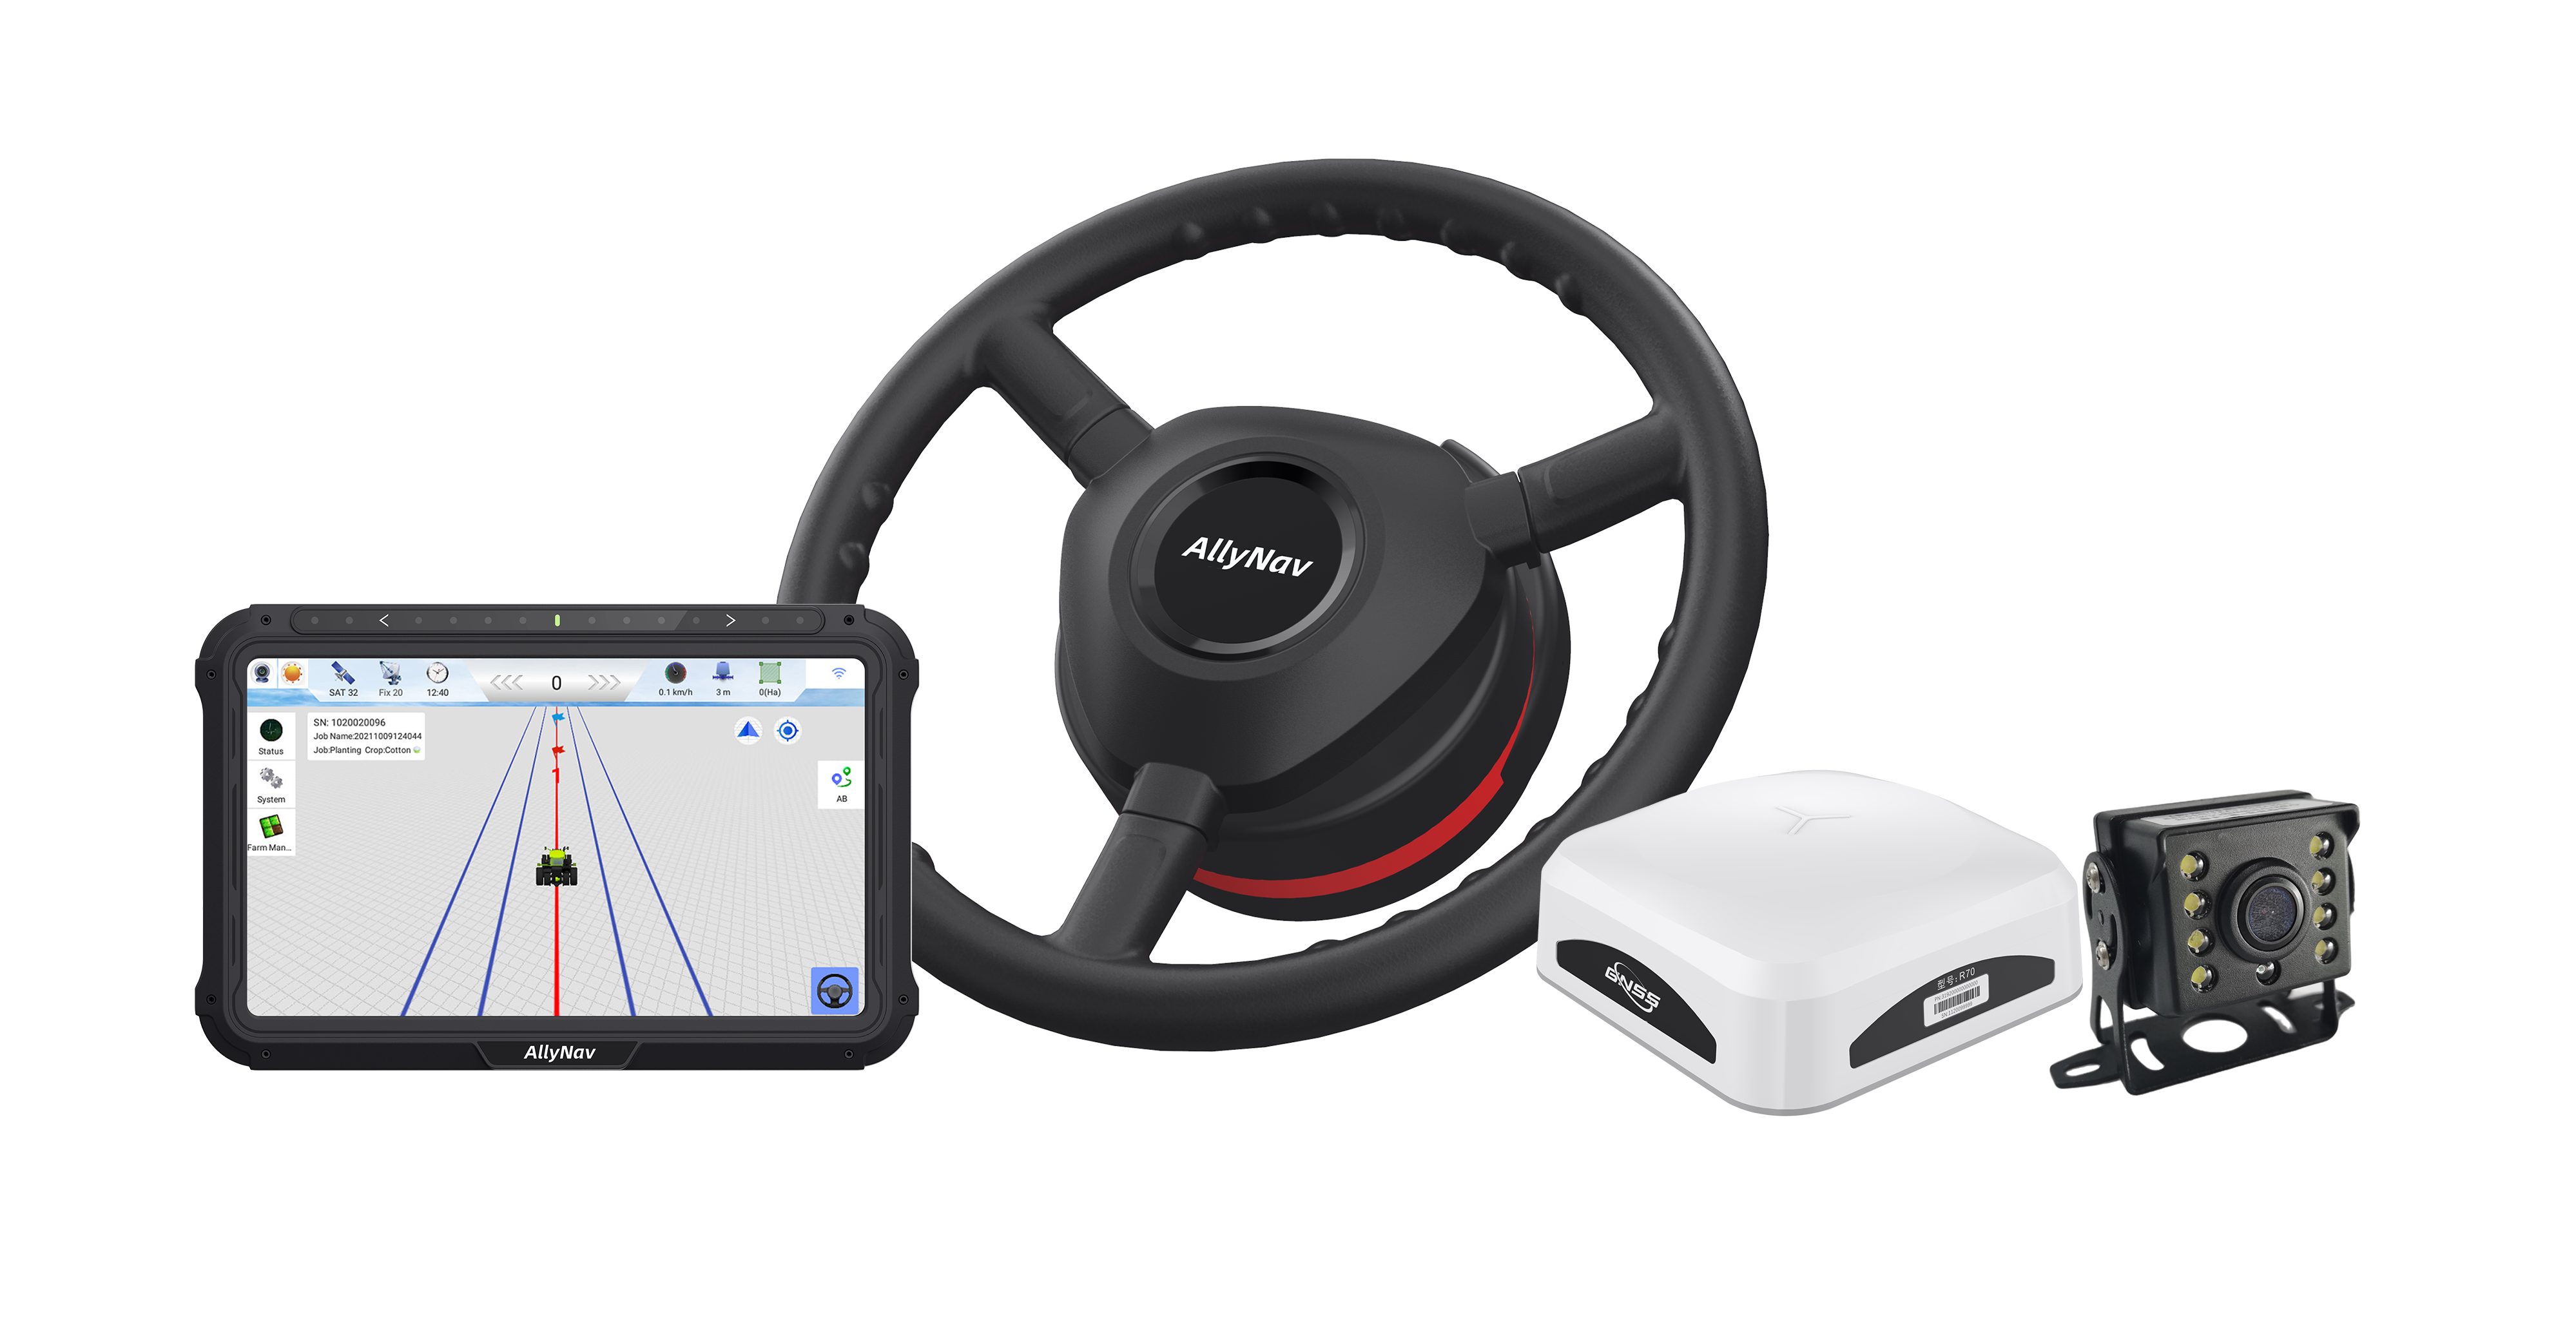  AF305 GNSS Auto-Steering System